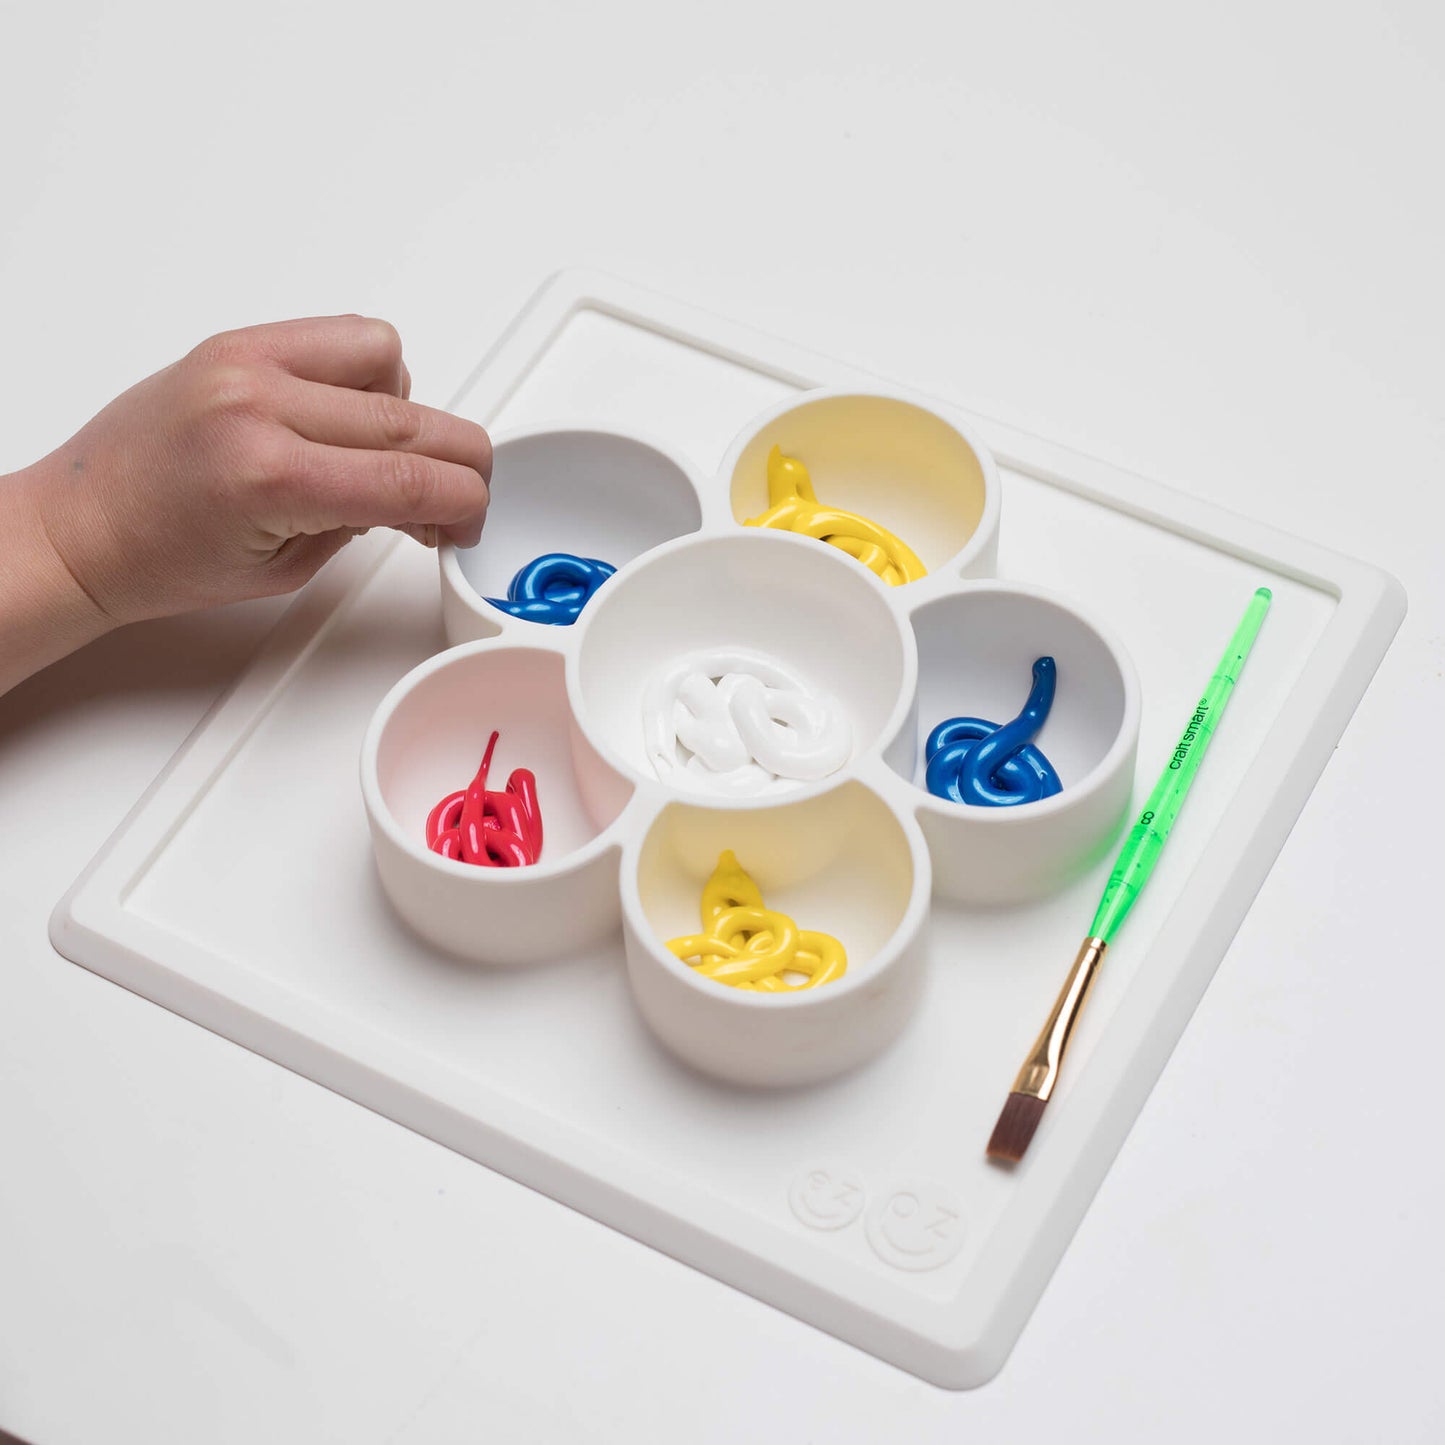 The Mini Play Mat in Cream by ezpz / Modern Silicone Craft Plate that Suctions to the Table